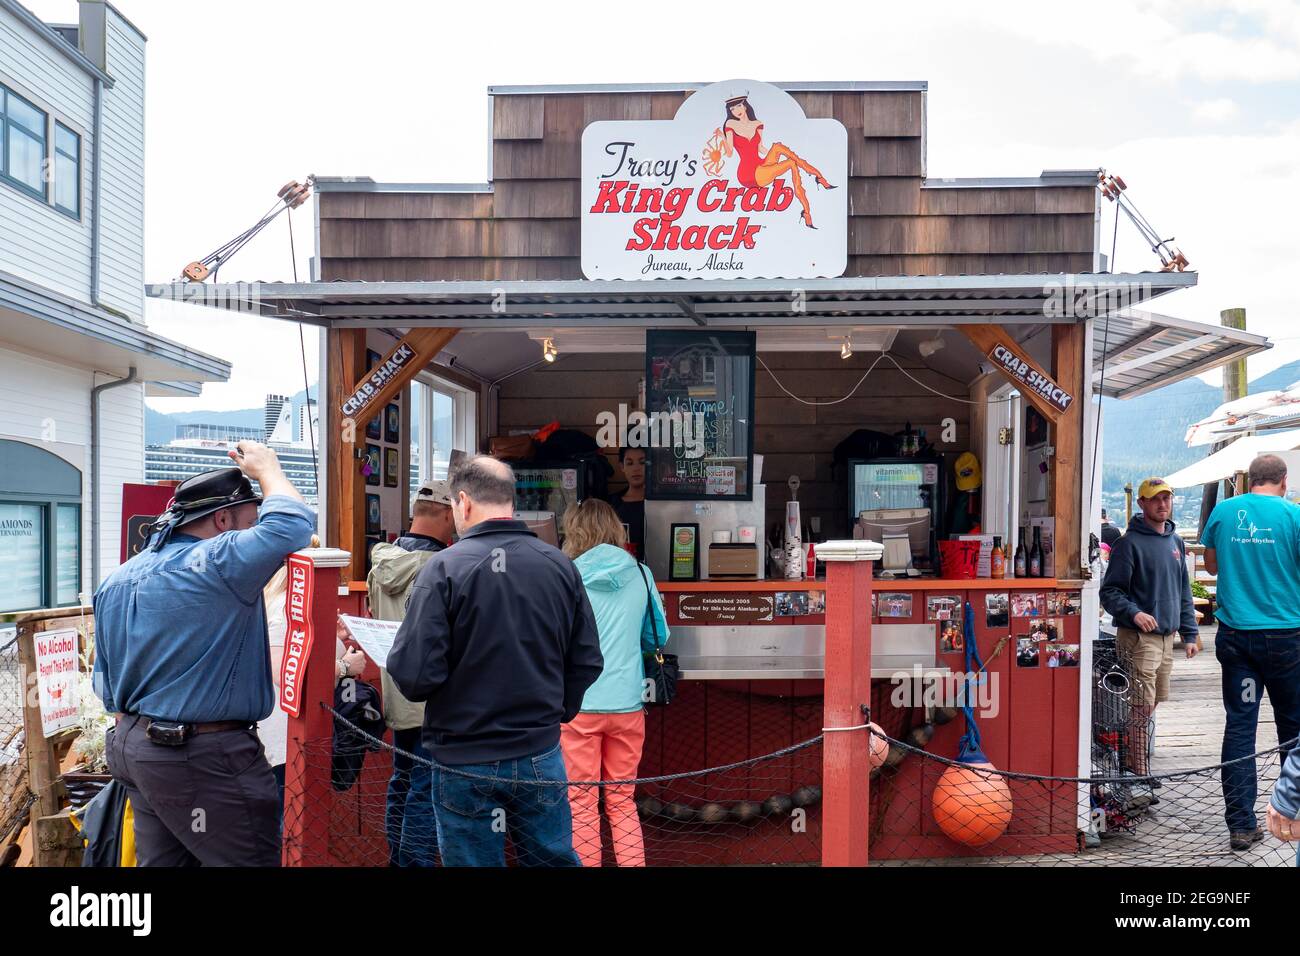 Tracy's King Crab Shack in Juneau, Alaska is famous for its King Crab Stock Photo